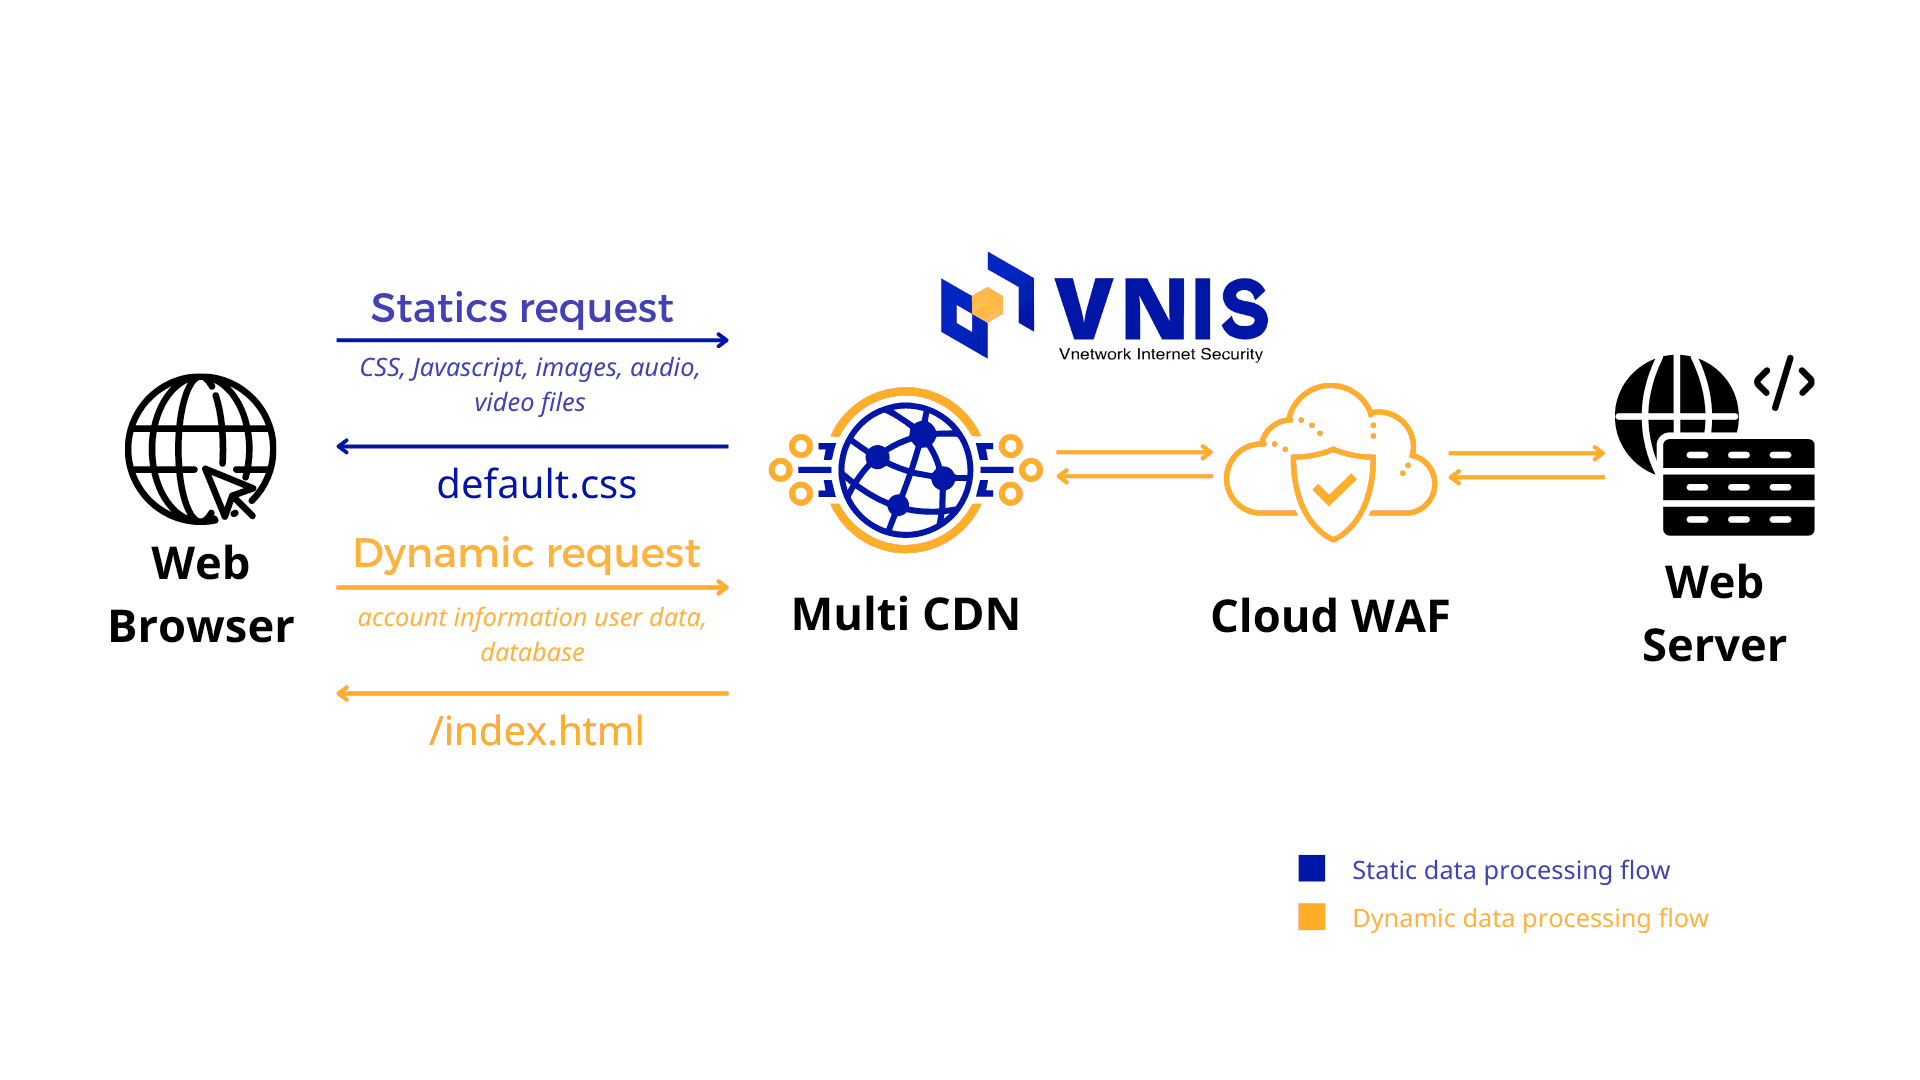 How does VNIS accelerate the delivery of static and dynamic content?